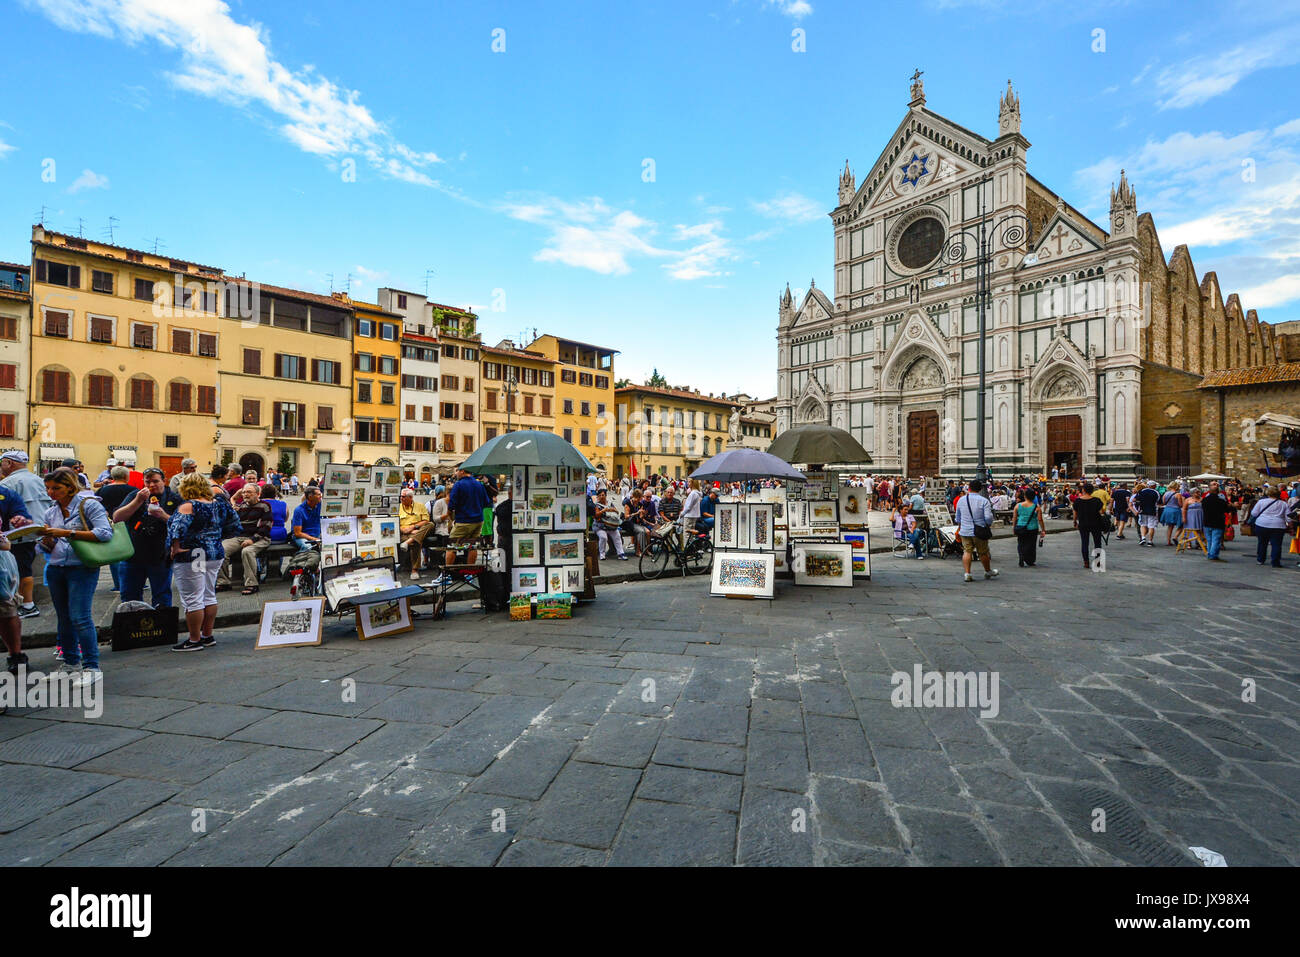 Tourists shop the local artists and artwork in Piazza di Santa Croce on a busy day in front of the Basilica di Santa Croce Stock Photo